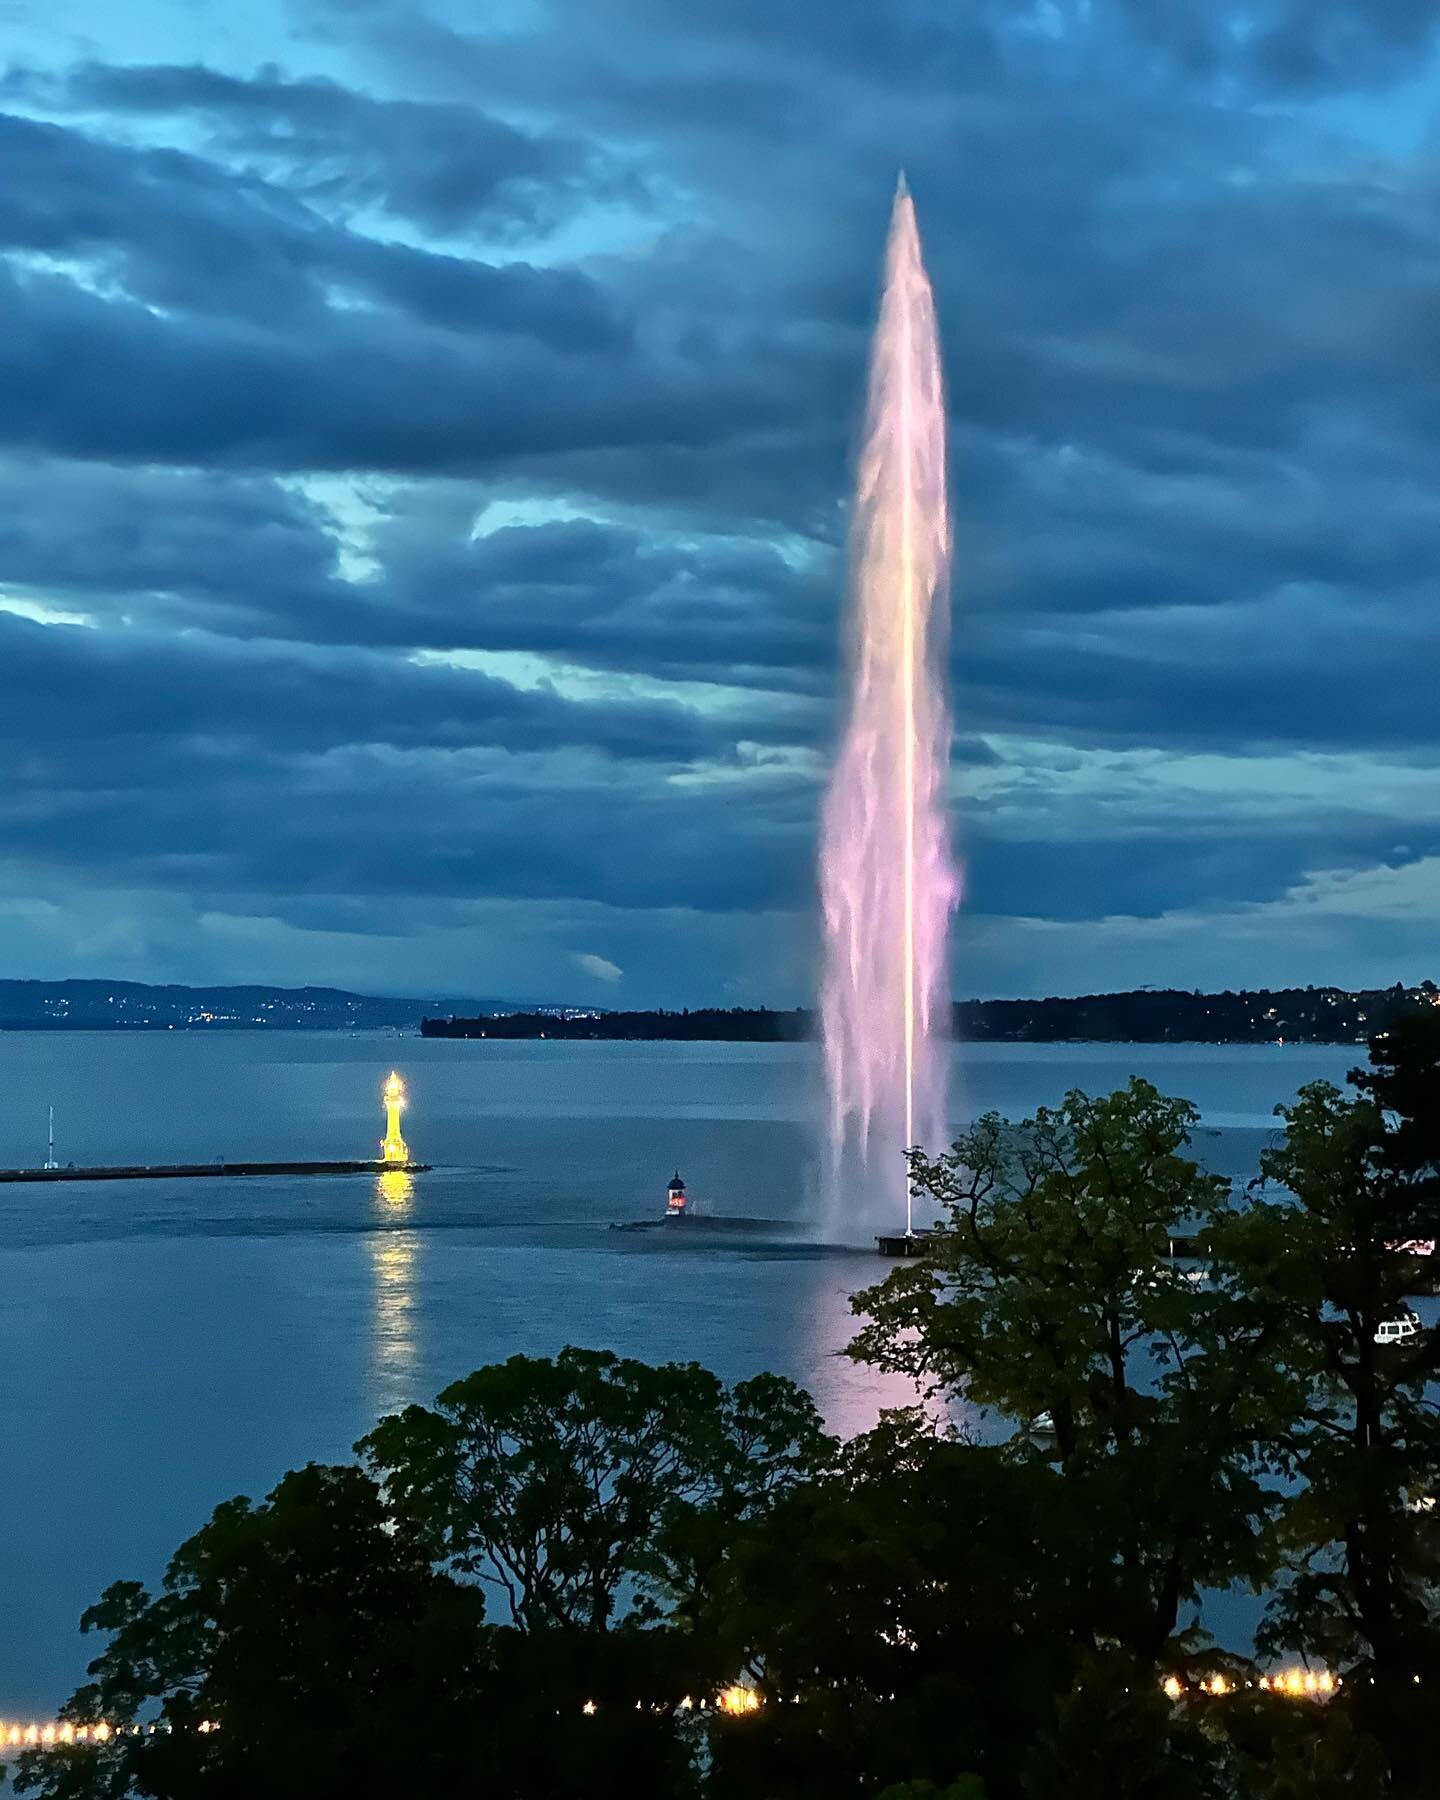 Last night, I had drinks with a view at Geneva&rsquo;s popular @metrooftop. And, my, what a view it was! 🤩

POLL: Do you prefer Geneva&rsquo;s Jet d&rsquo;Eau during the day, at sunset or at night? Me, I&rsquo;m all of the above! ⛲️

#geneva #geneva